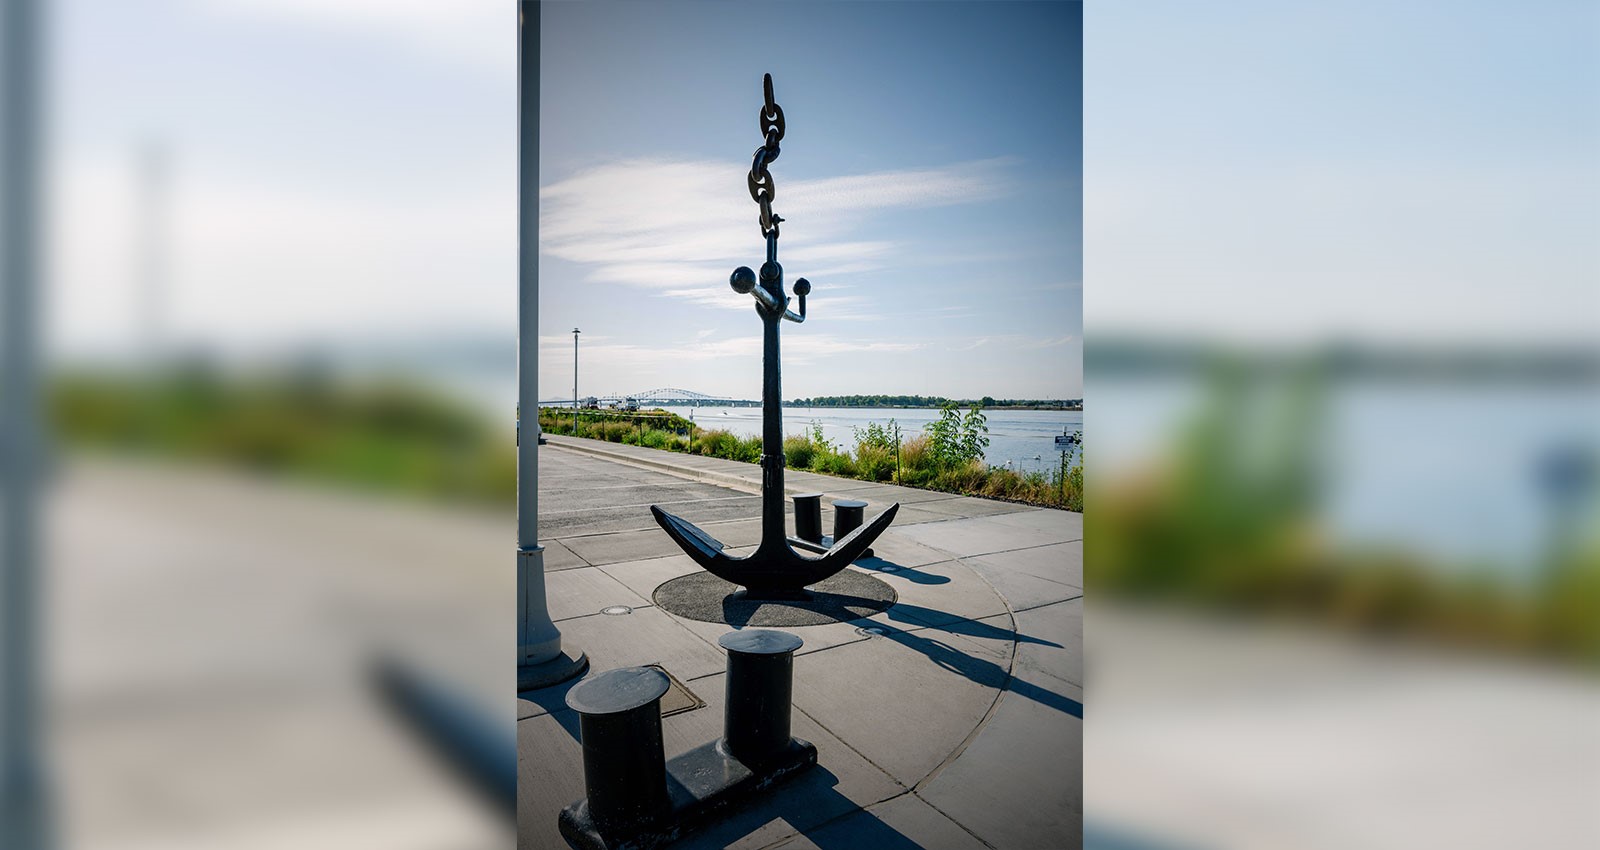 Anchor at East Notch art installation on Clover Island with the Columbia River in the background.